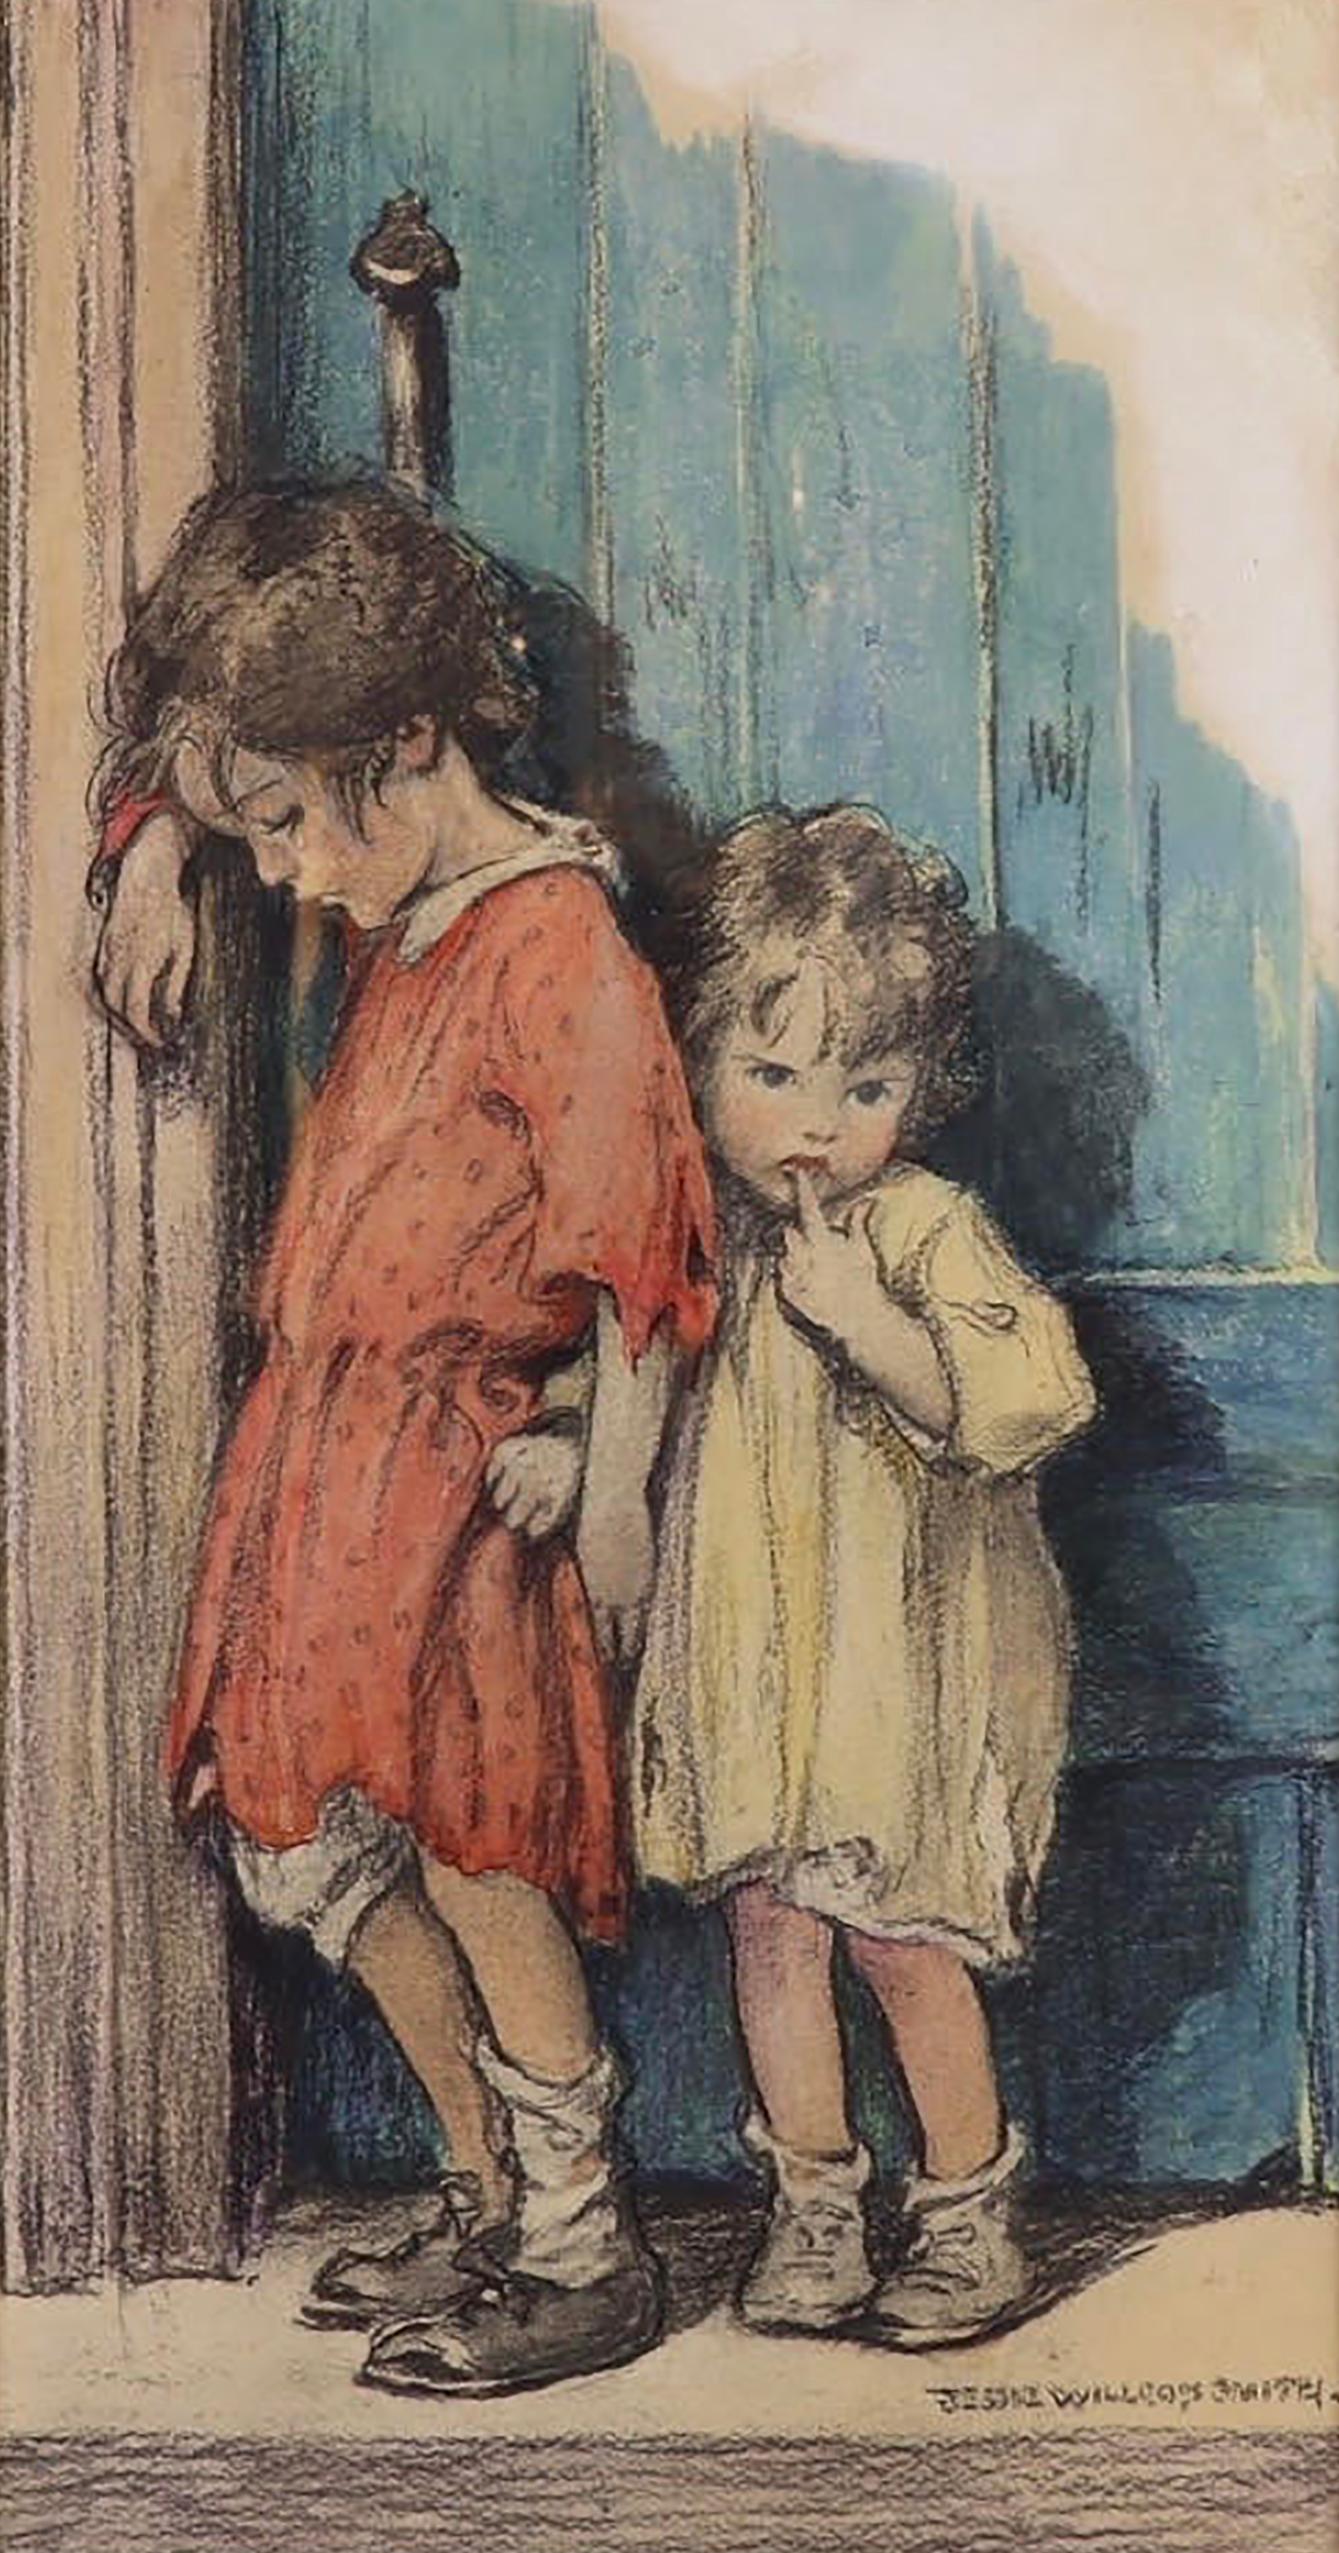 Two Young Girls - Mixed Media Art by Jessie Willcox Smith